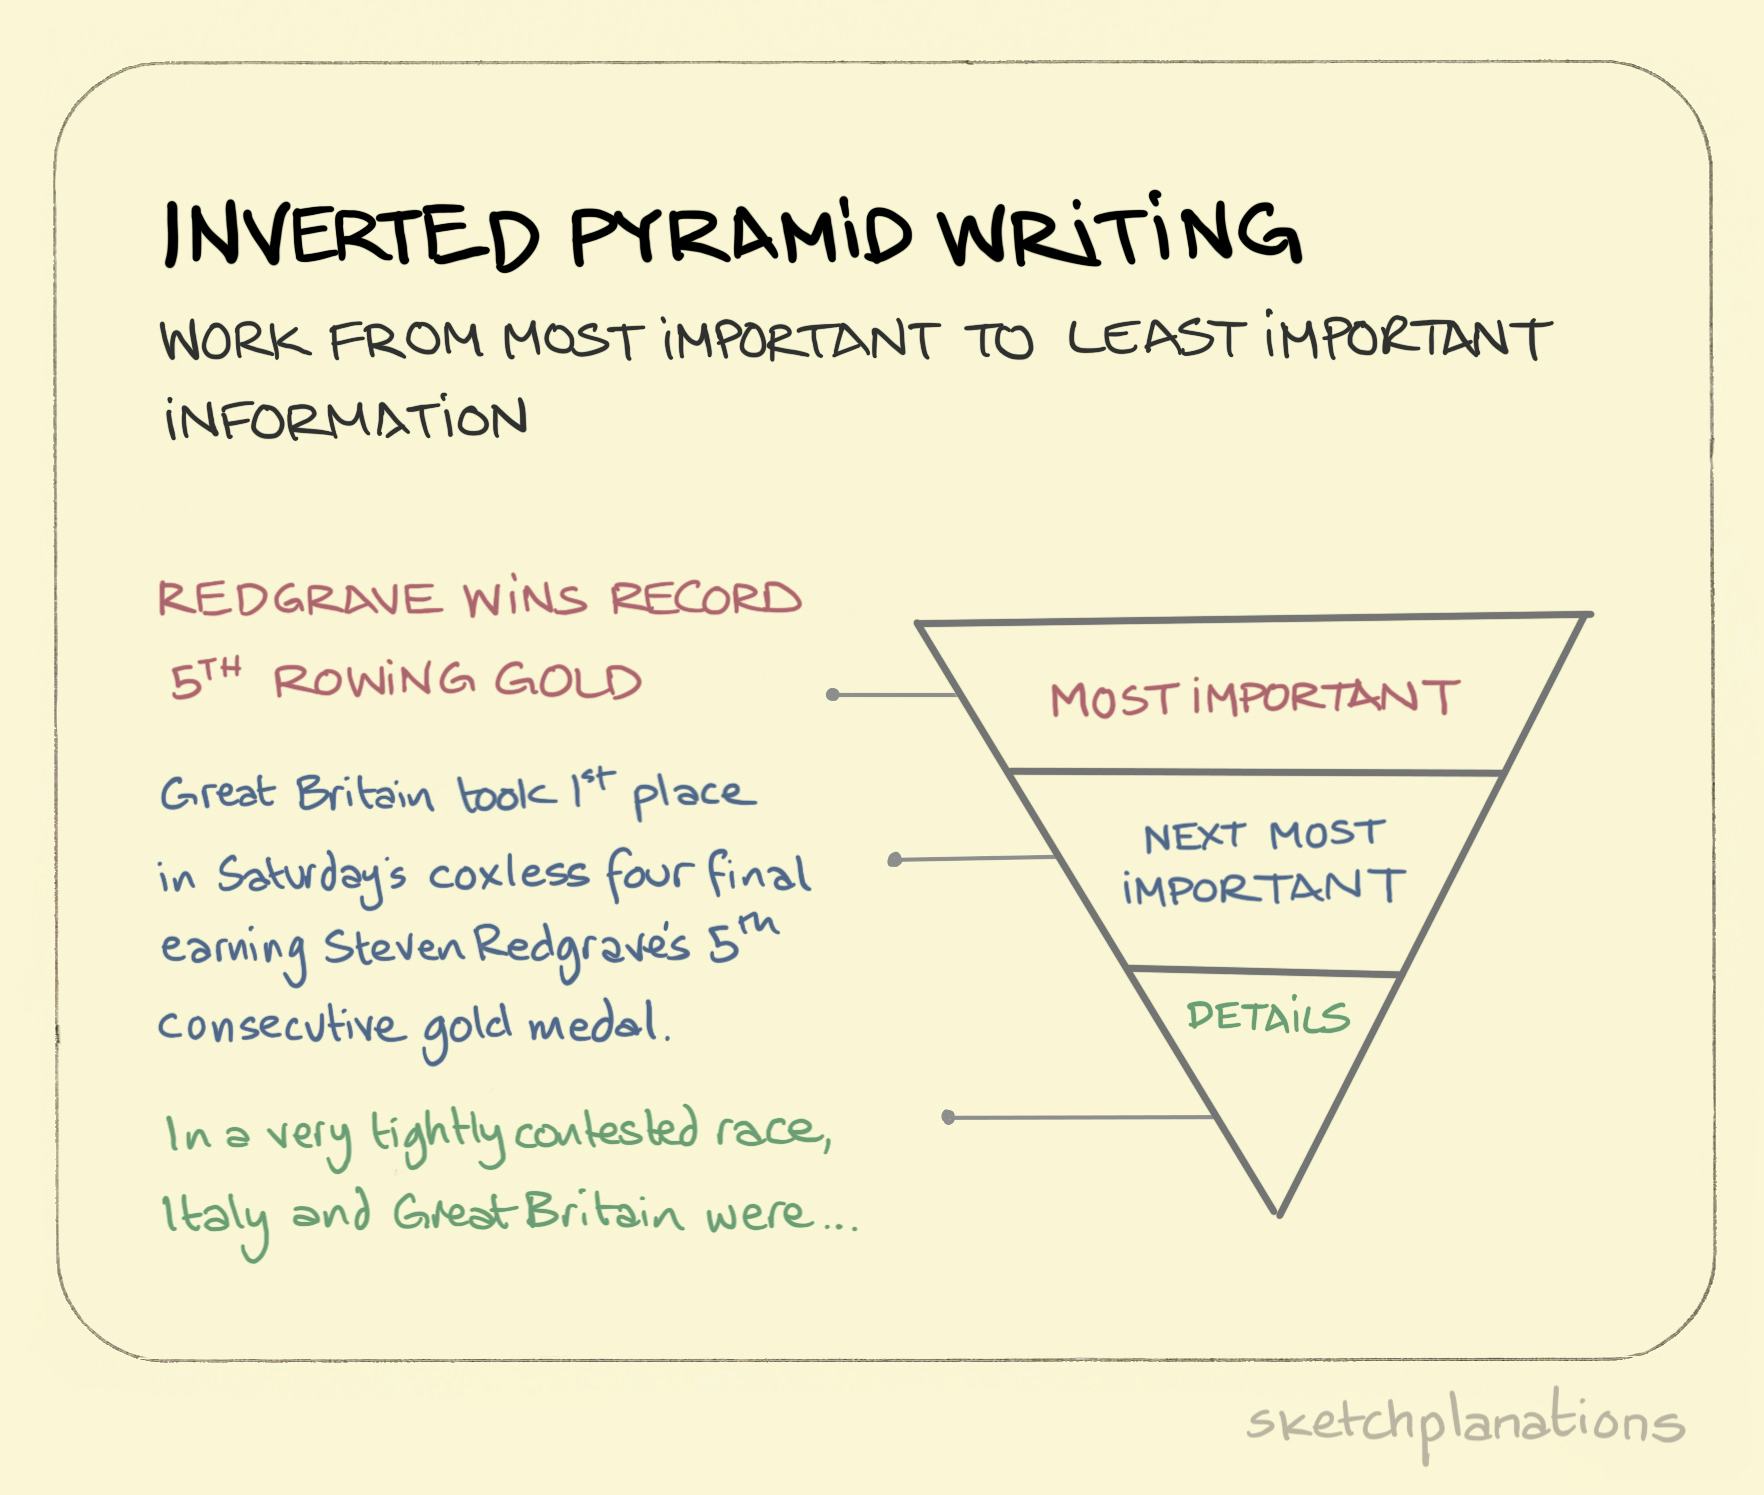 Inverted pyramid writing illustration: giving a rowing sports example from the most important at the start to the details later